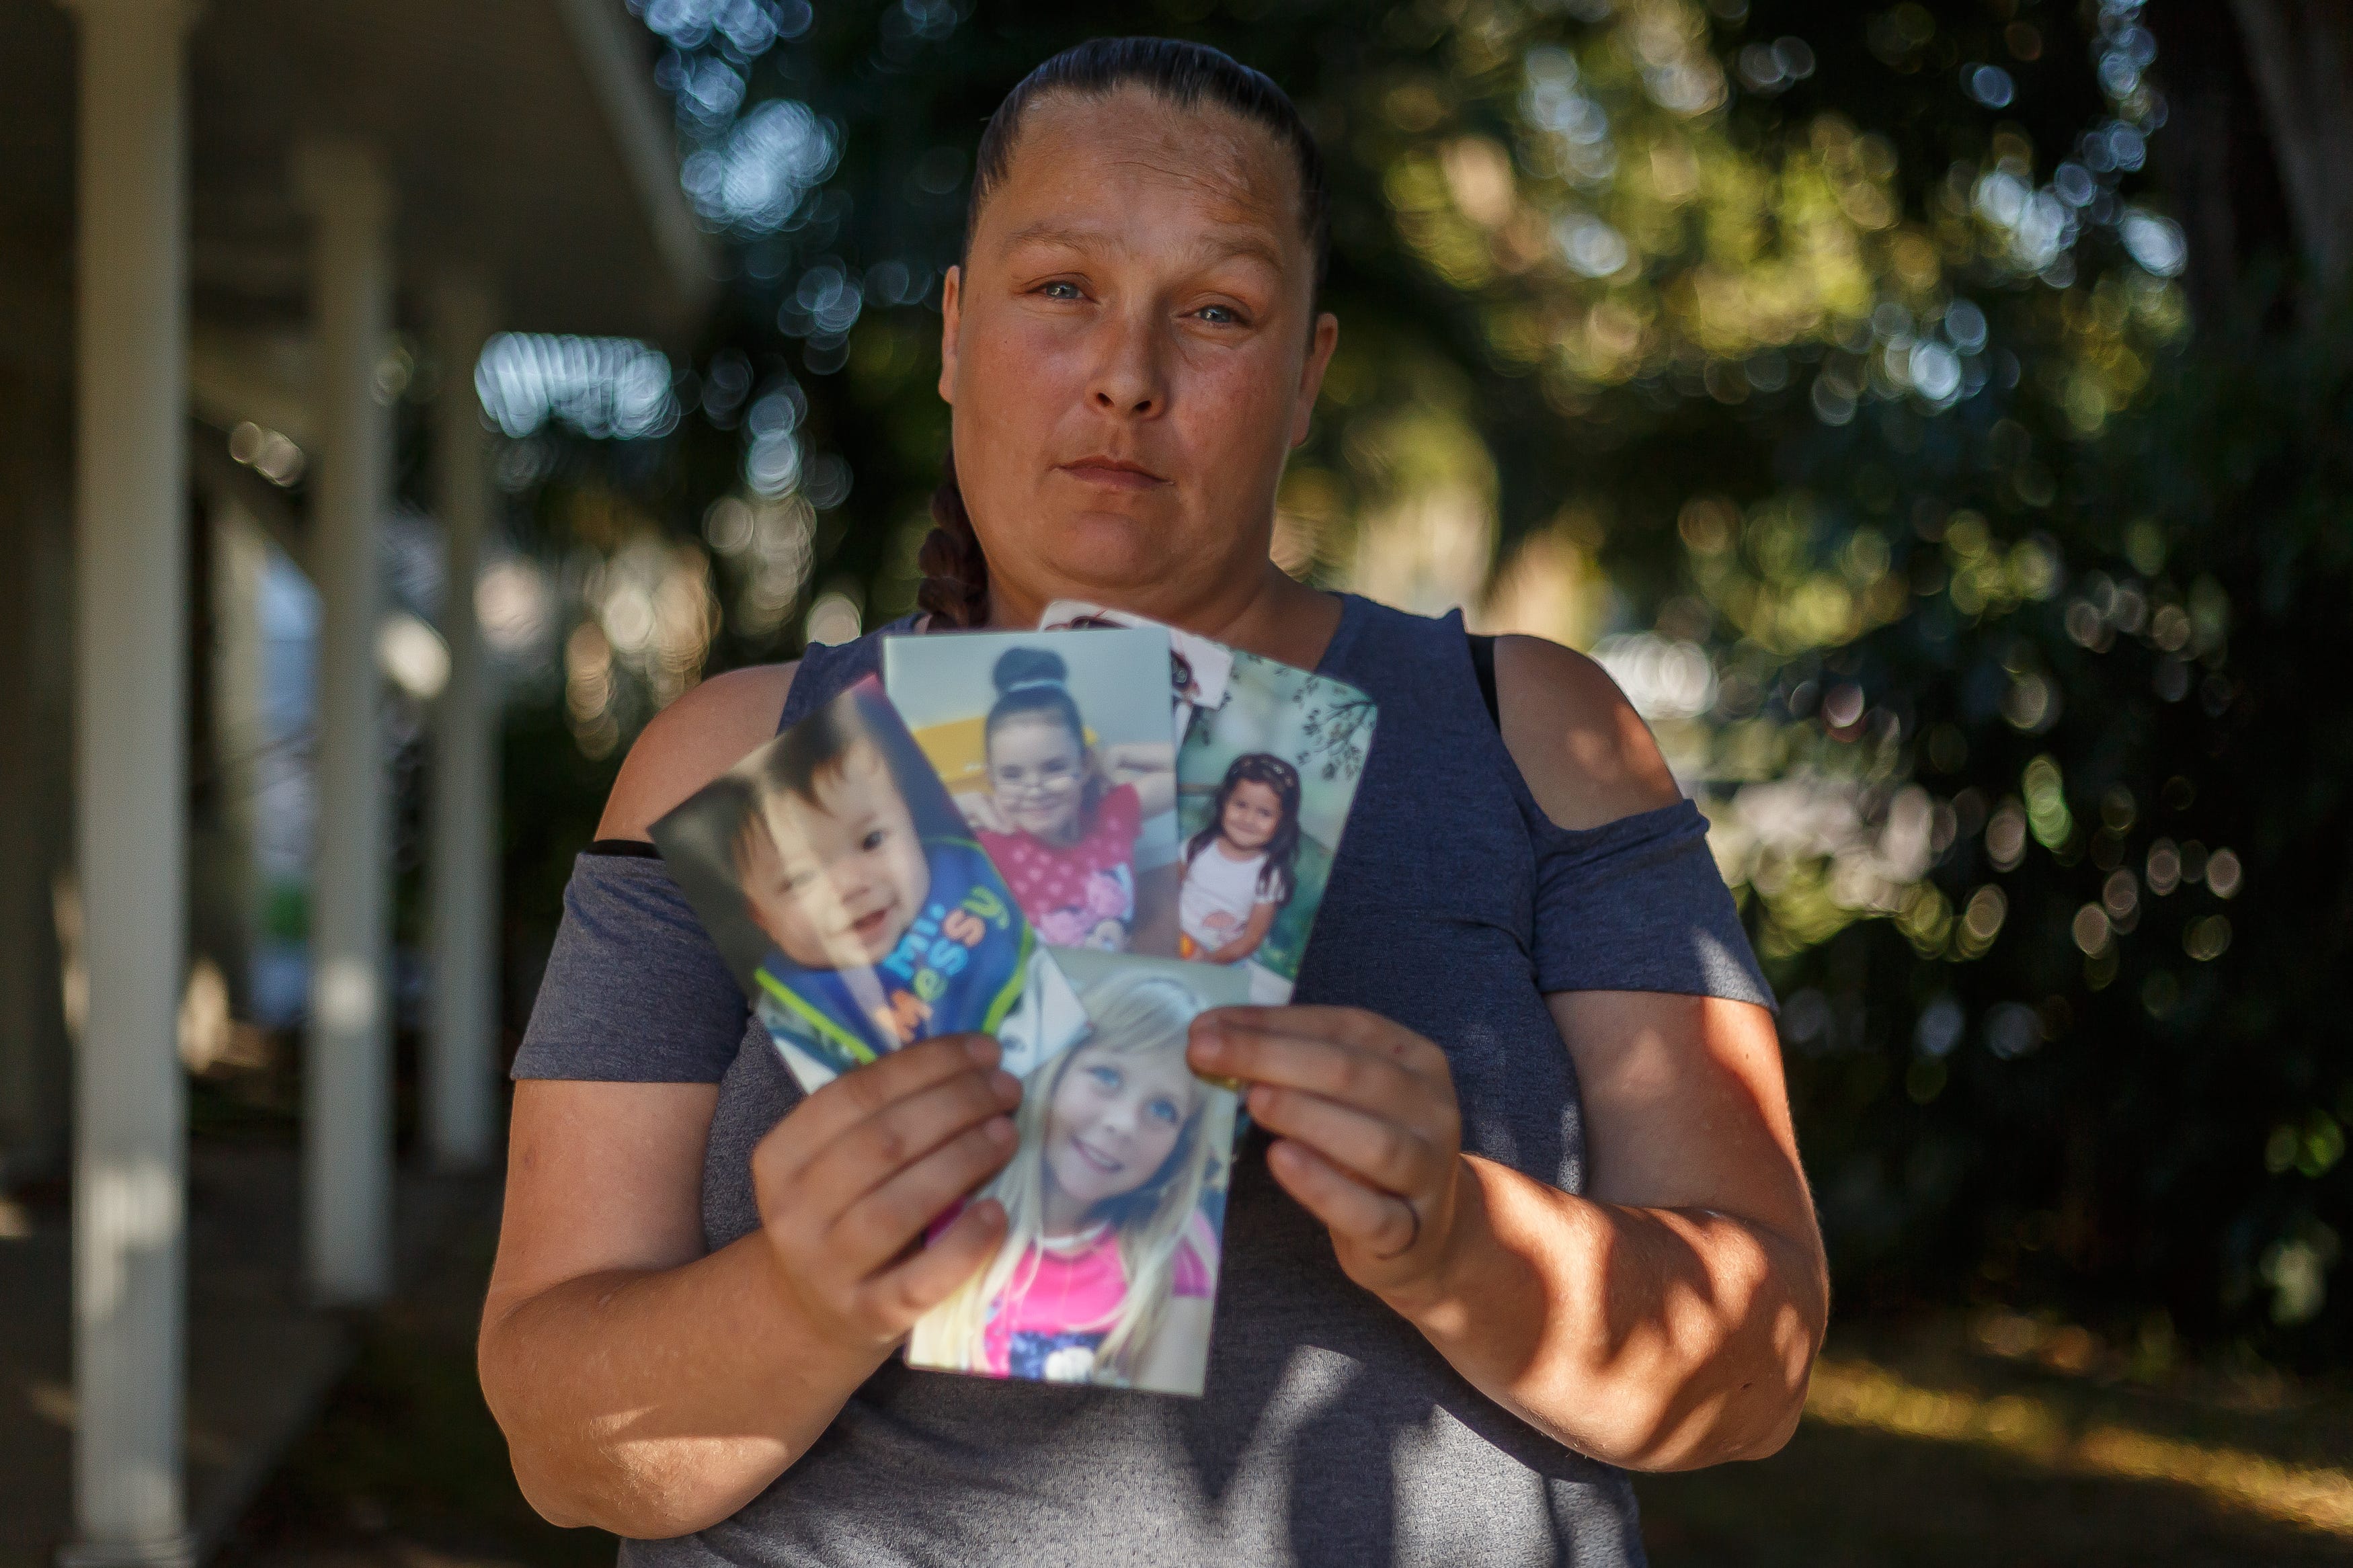 Florida mother fought for kids, couldnt please child welfare execs